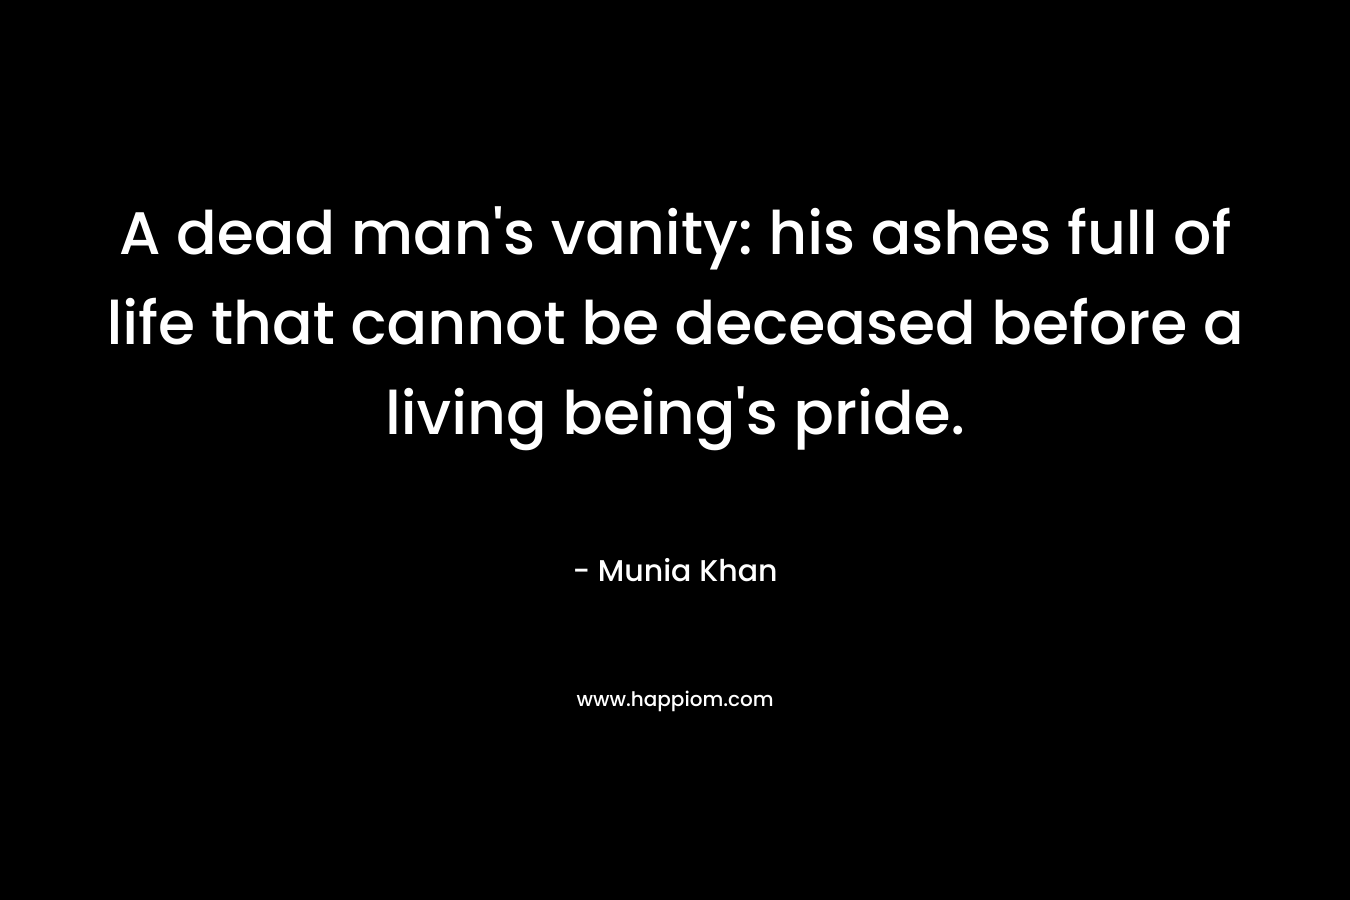 A dead man's vanity: his ashes full of life that cannot be deceased before a living being's pride.